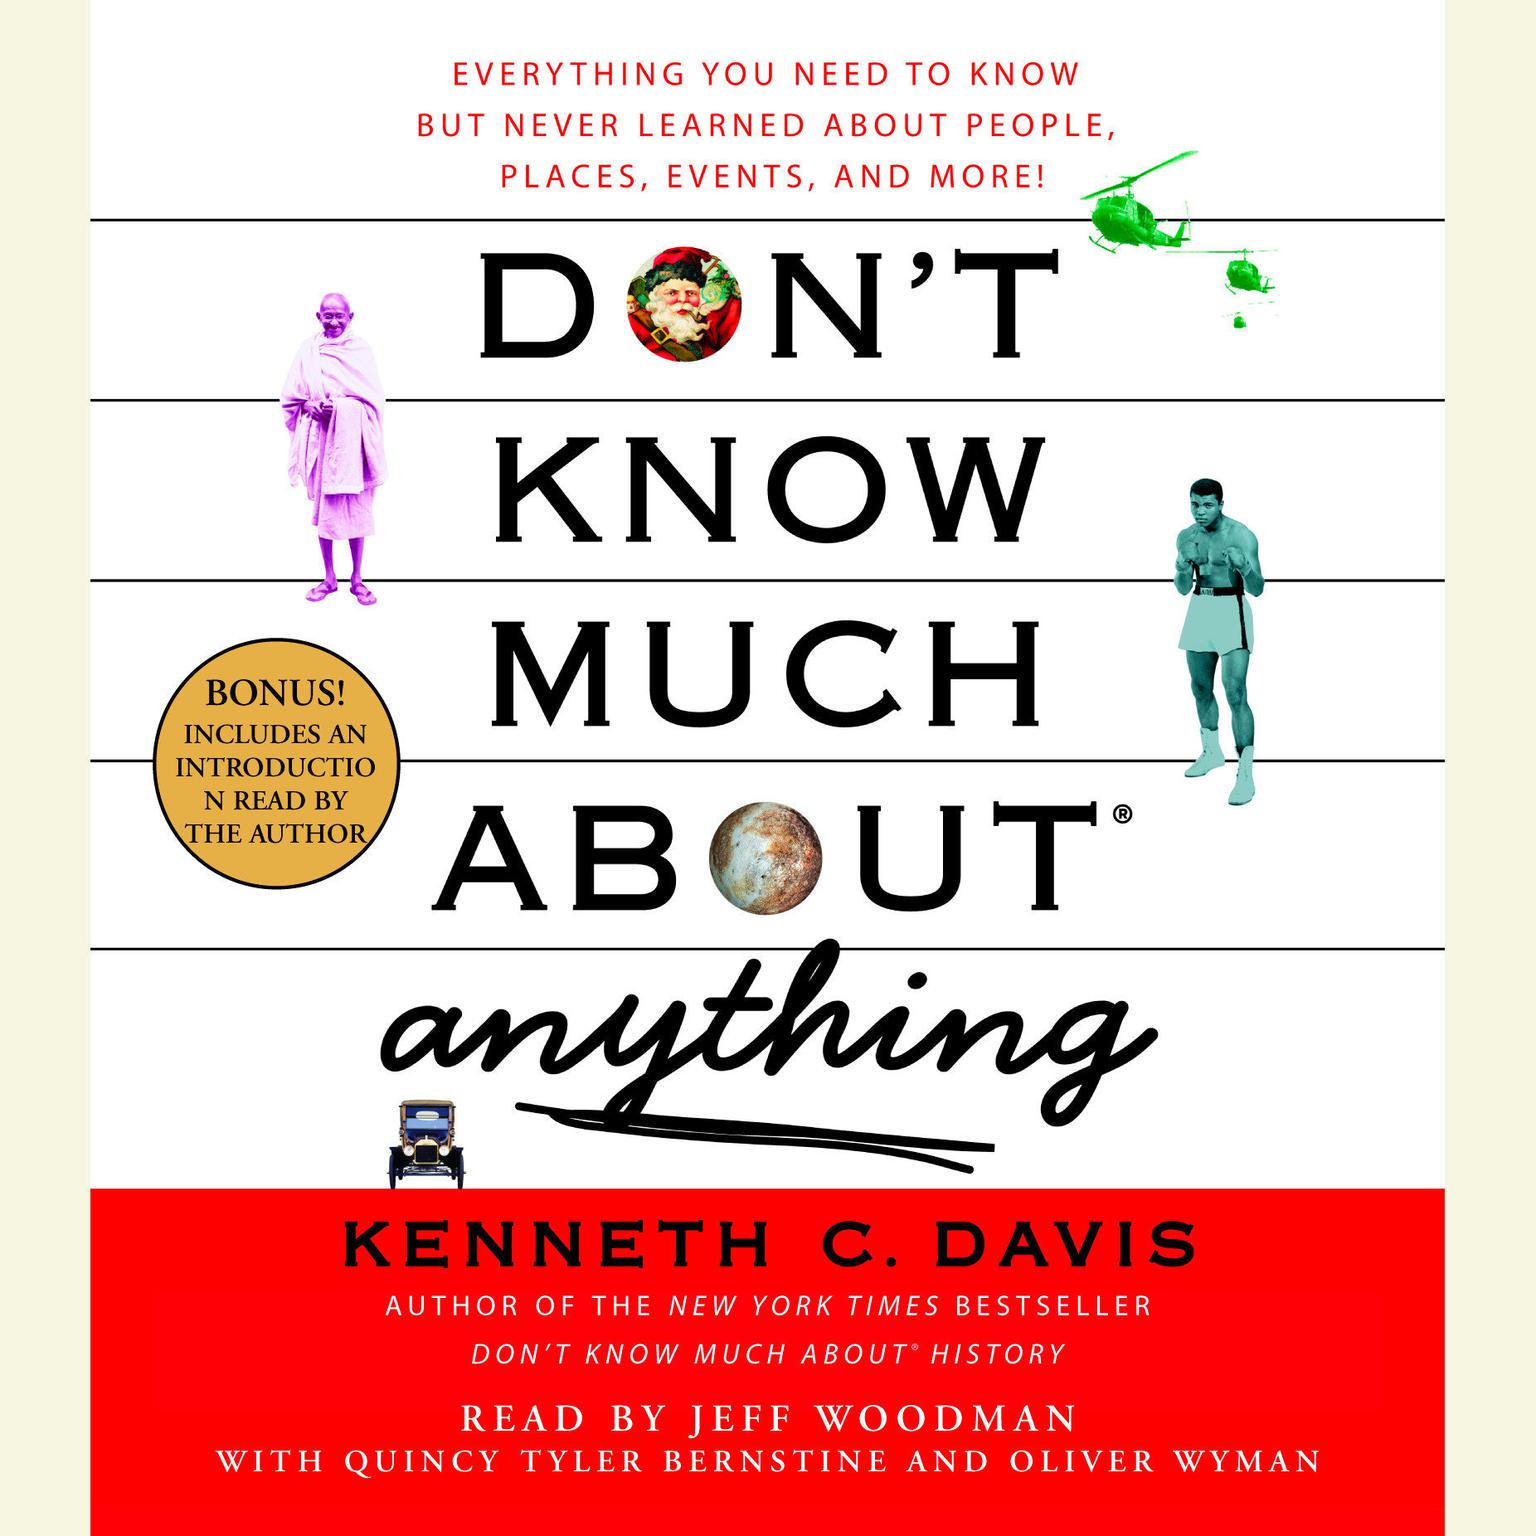 Dont Know Much About Anything (Abridged): Everything You Need to Know But Never Learned About People, Places, Events, And More! Audiobook, by Kenneth C. Davis